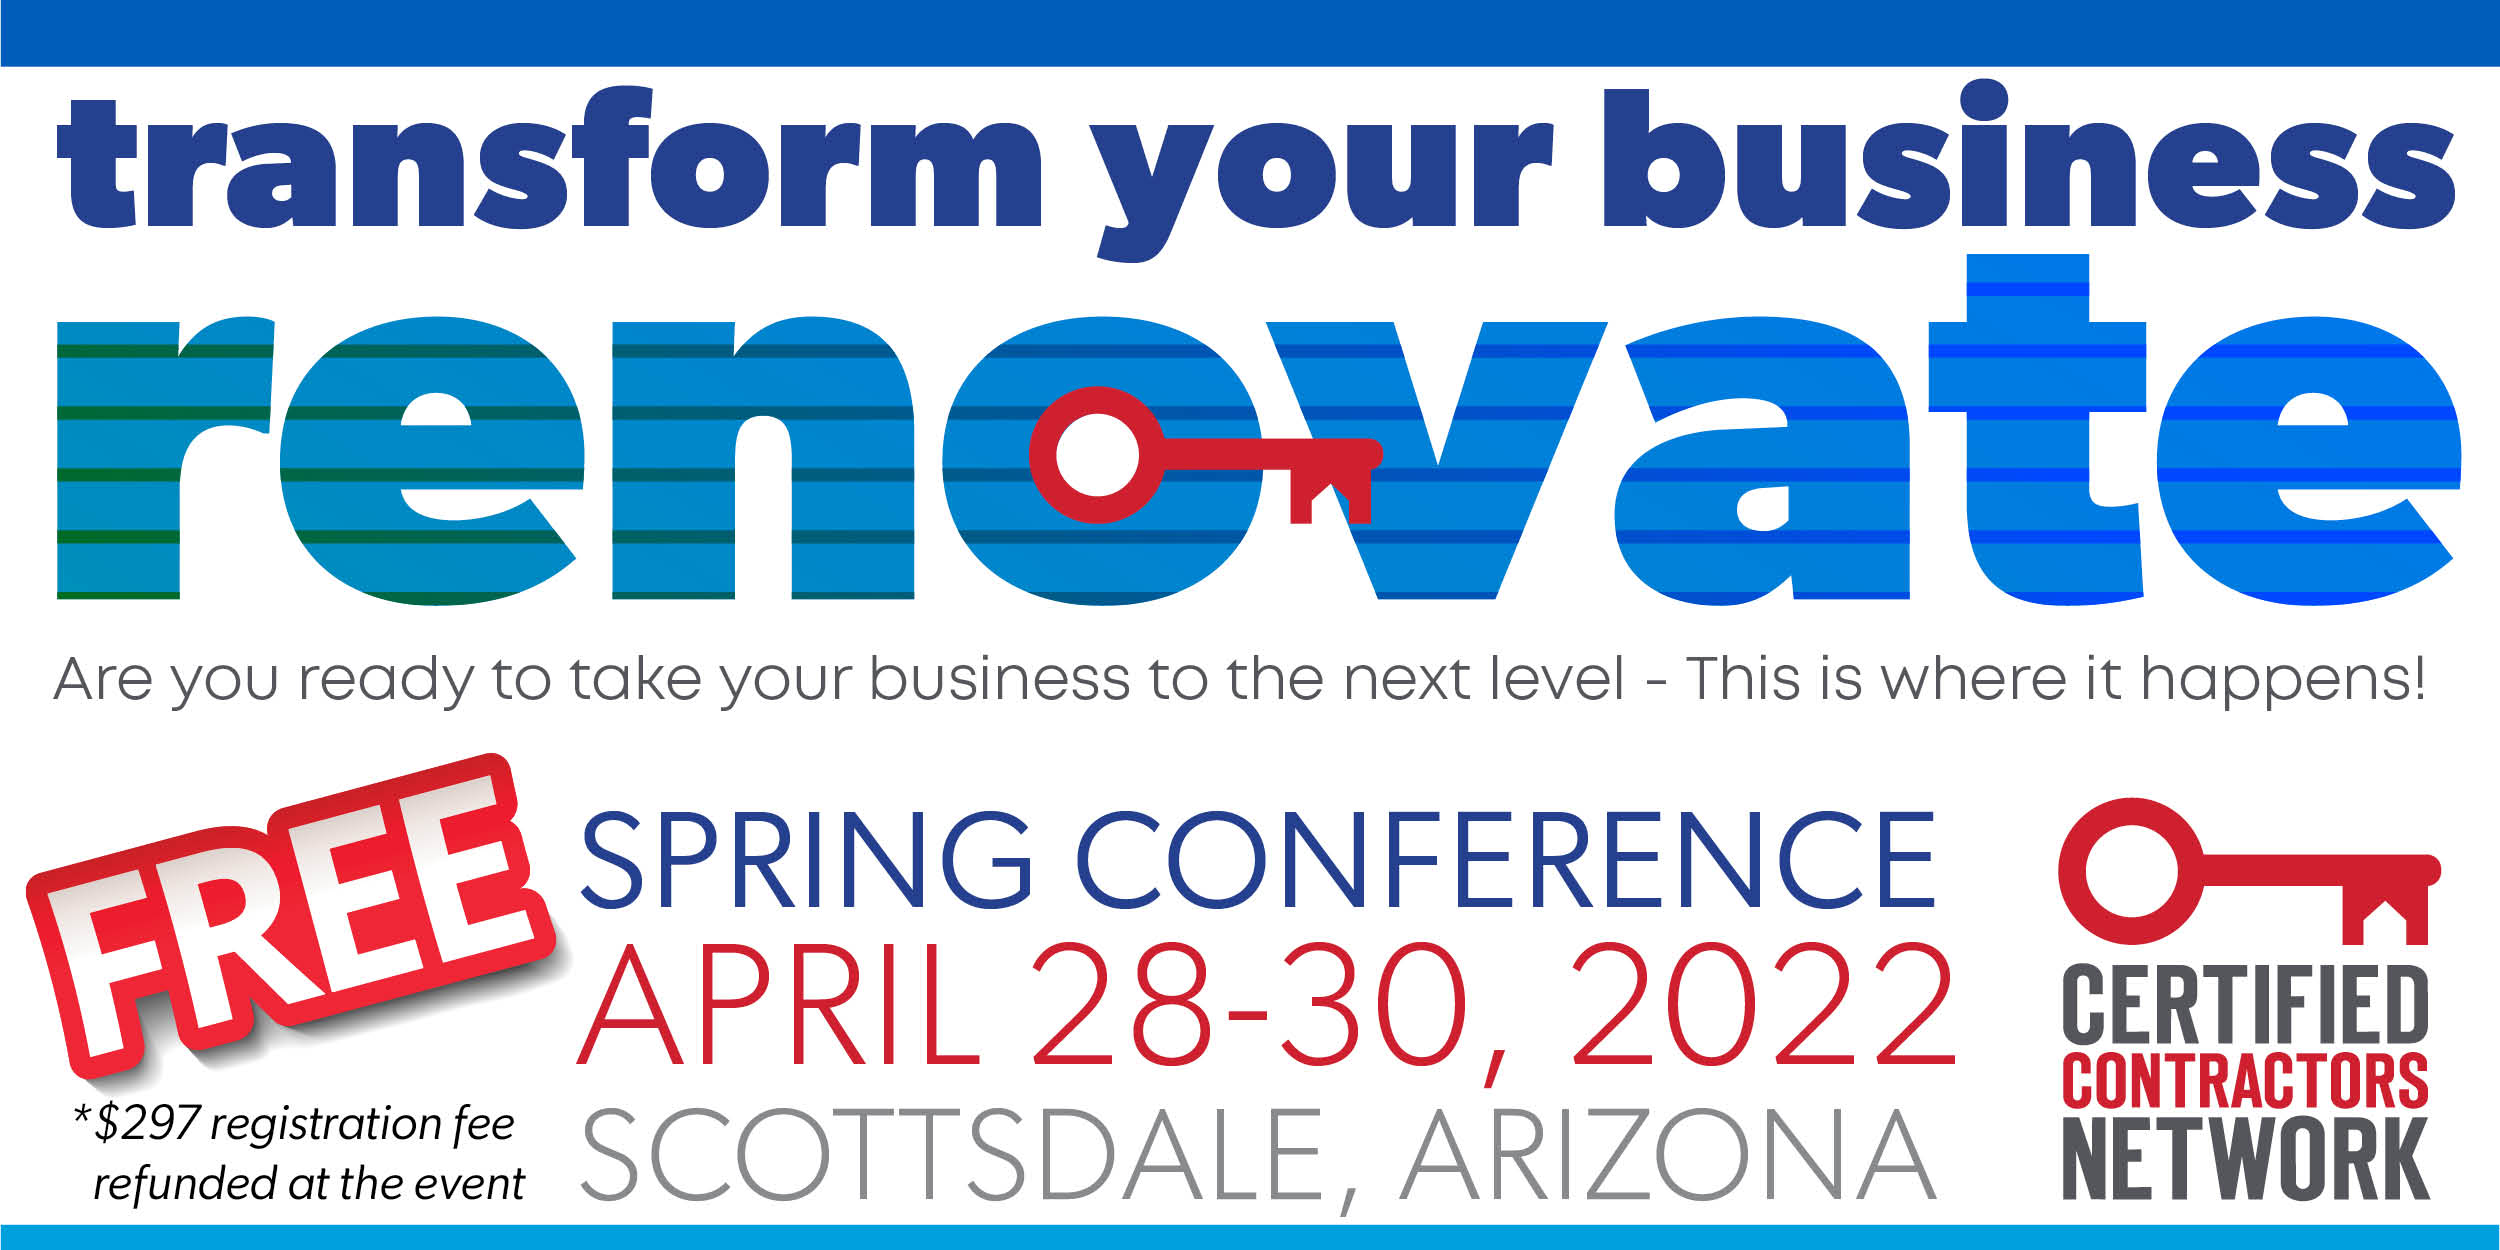 Register Early for the RENOVATE Spring Conference and Save!